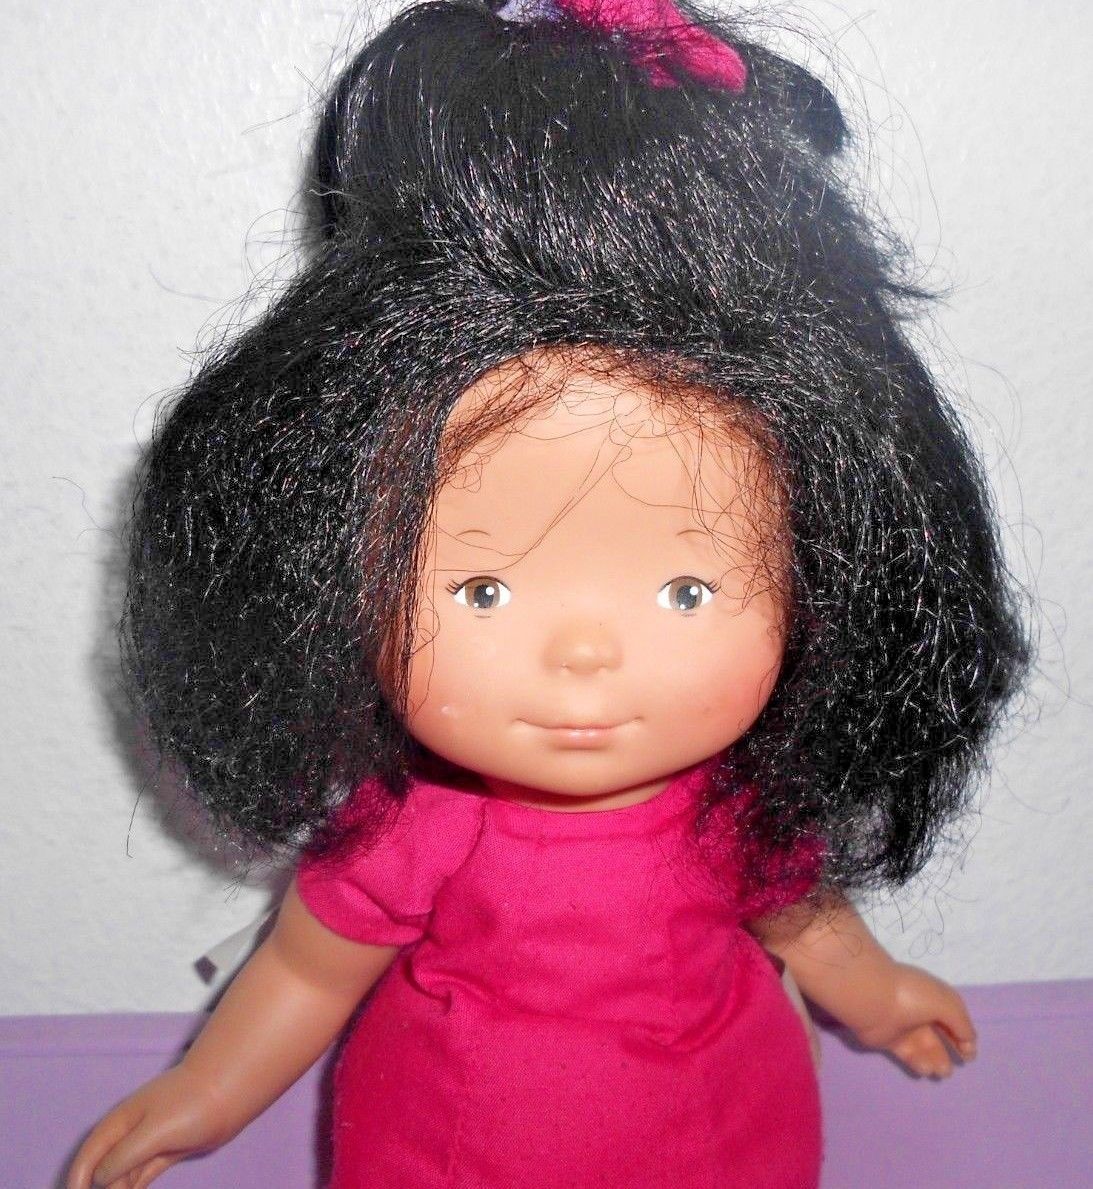 corolle asian baby doll